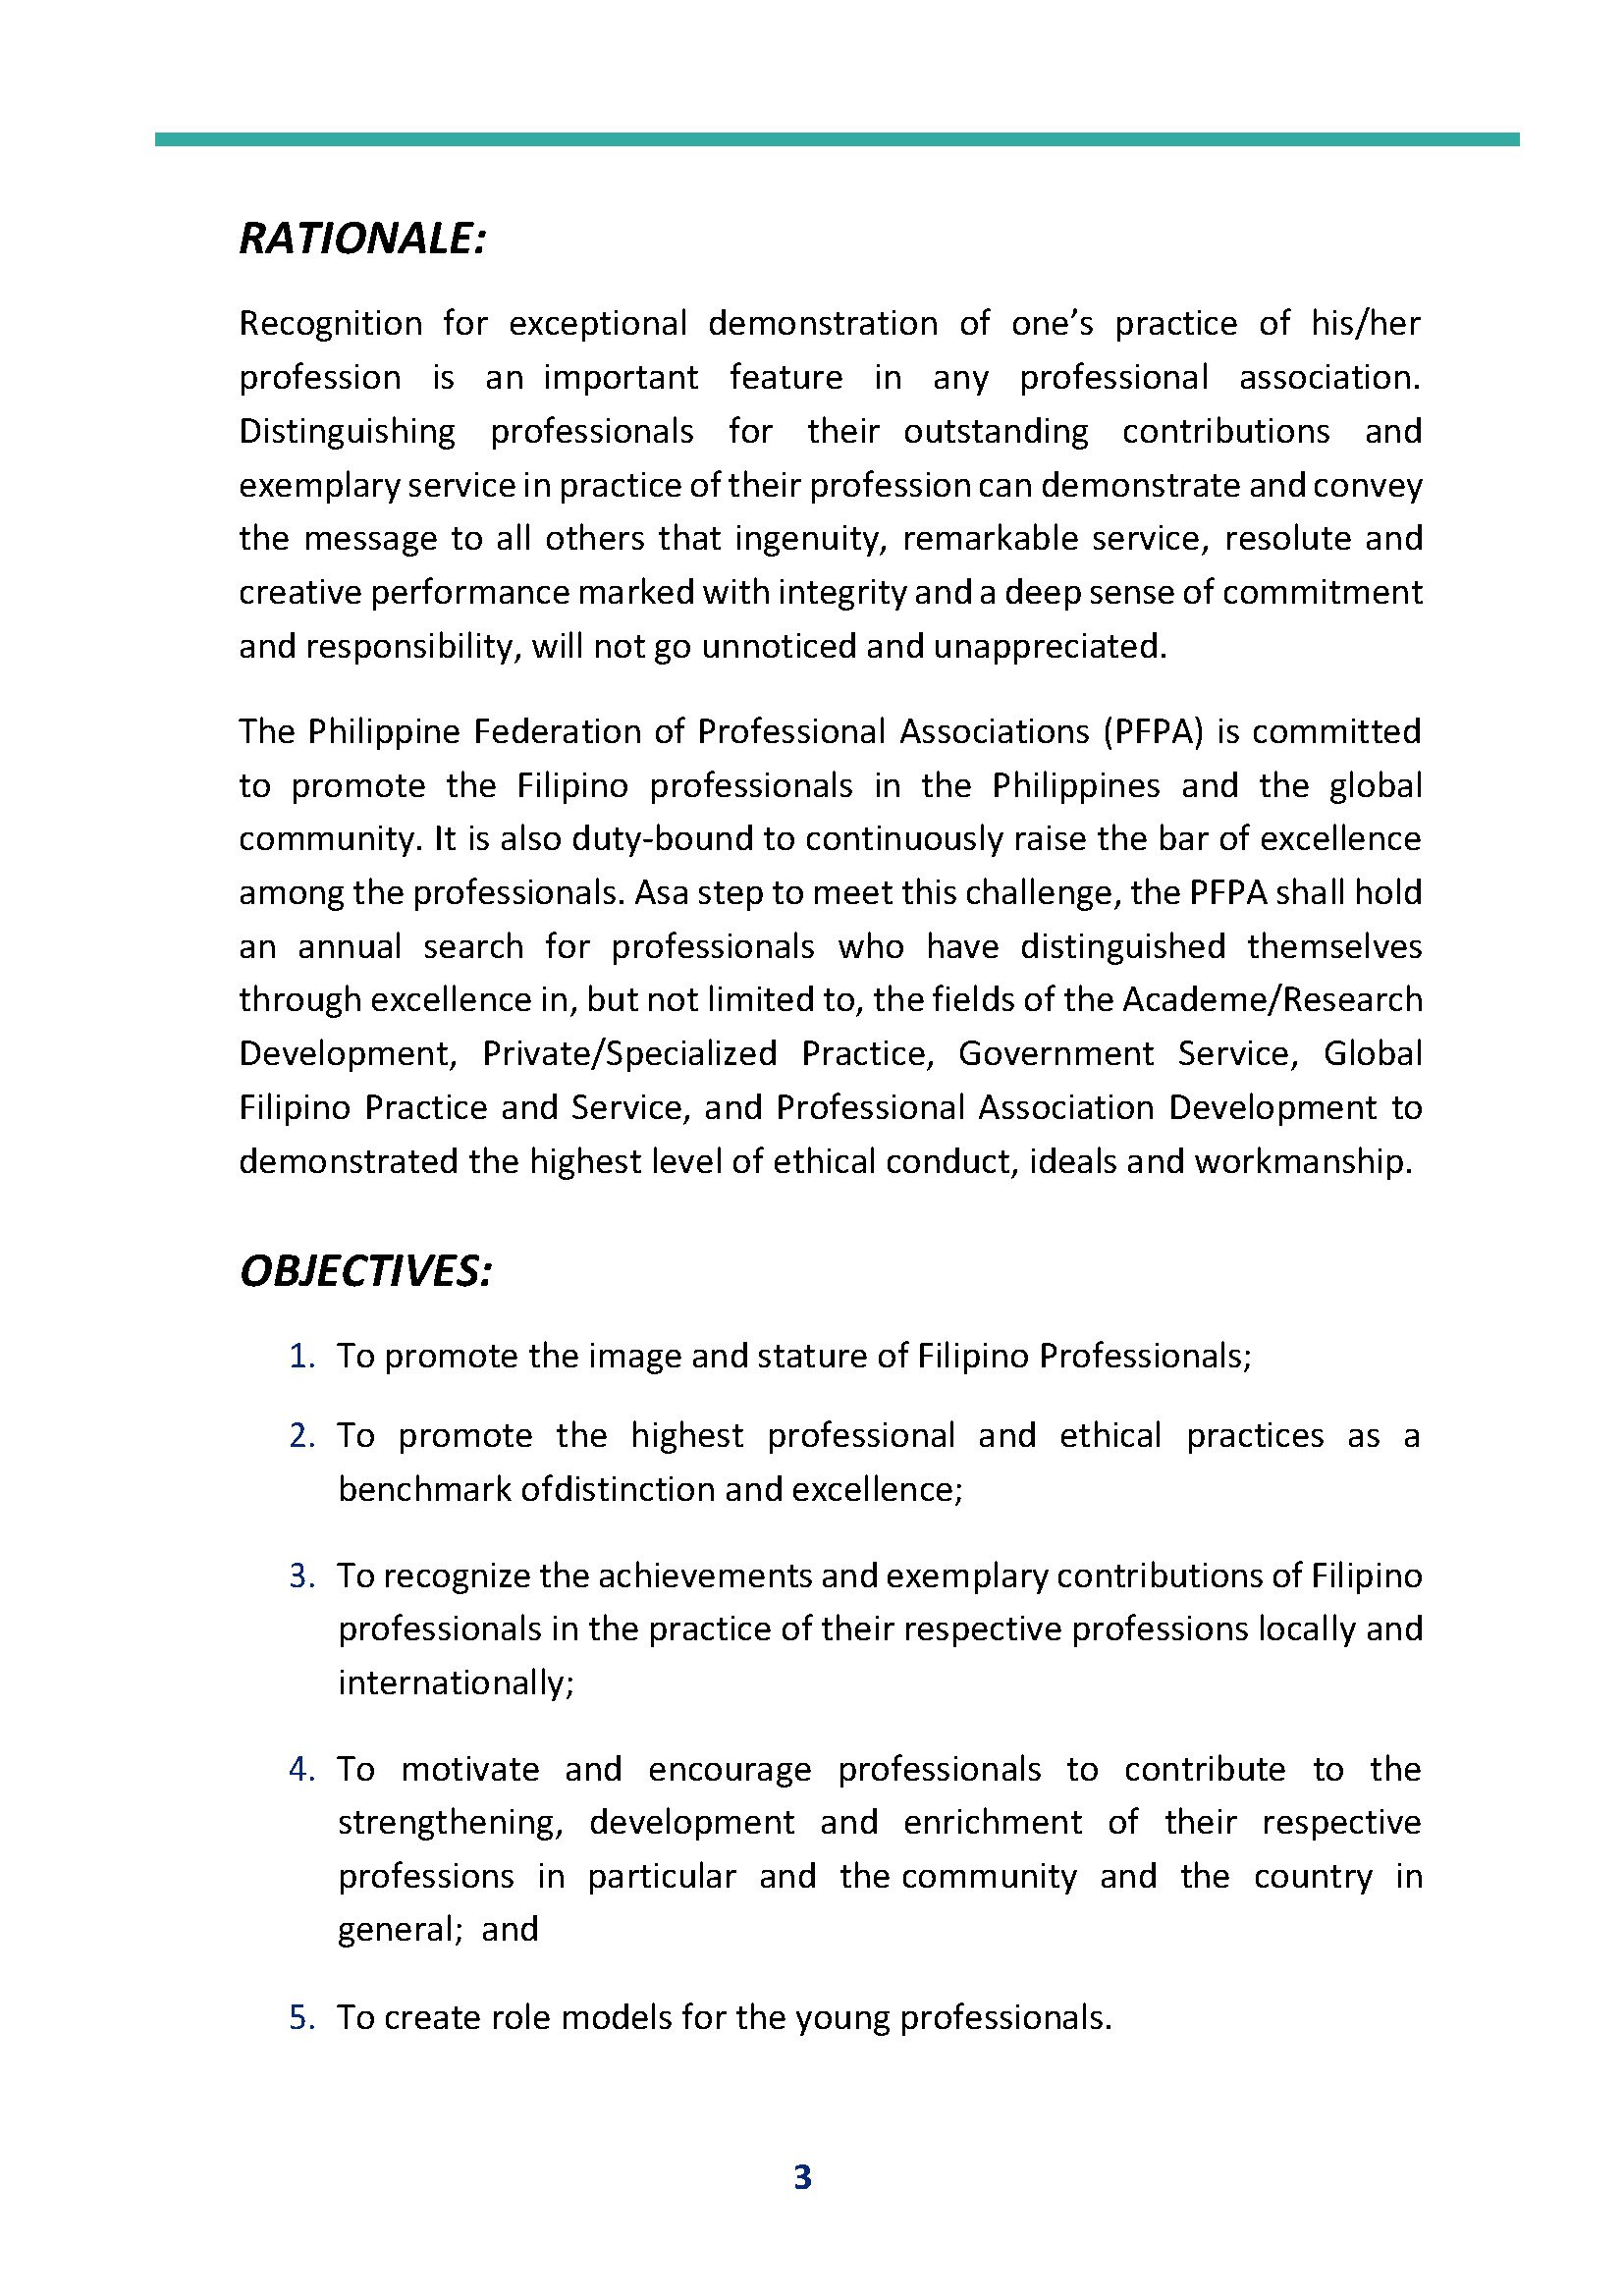 PFPA-Excellence-Awards-Guidelines-new (1)_Page_03.jpg